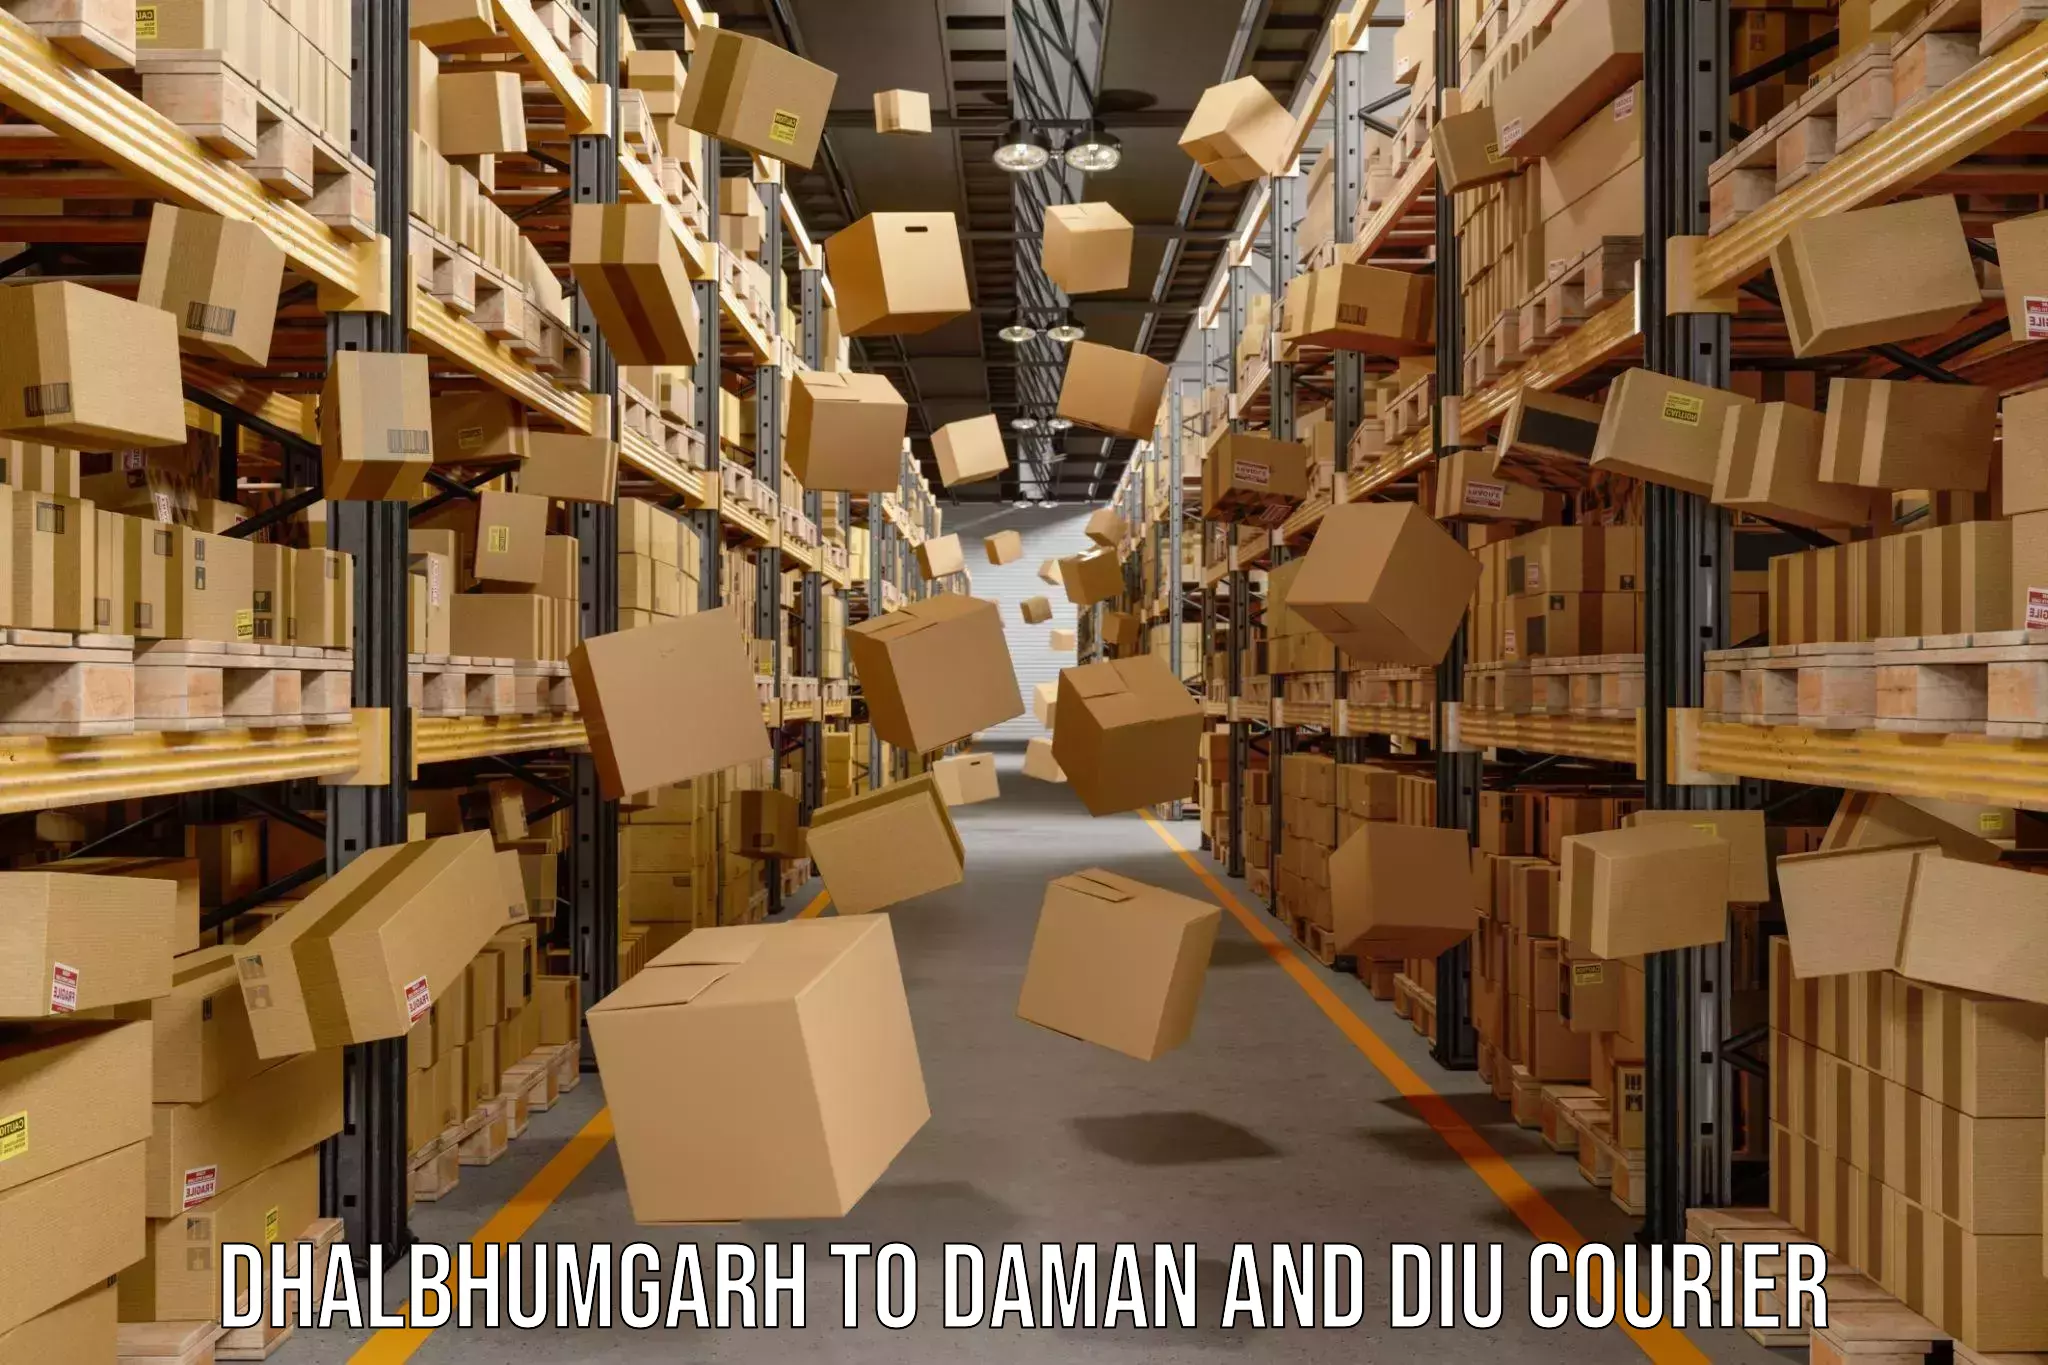 Sustainable courier practices Dhalbhumgarh to Daman and Diu